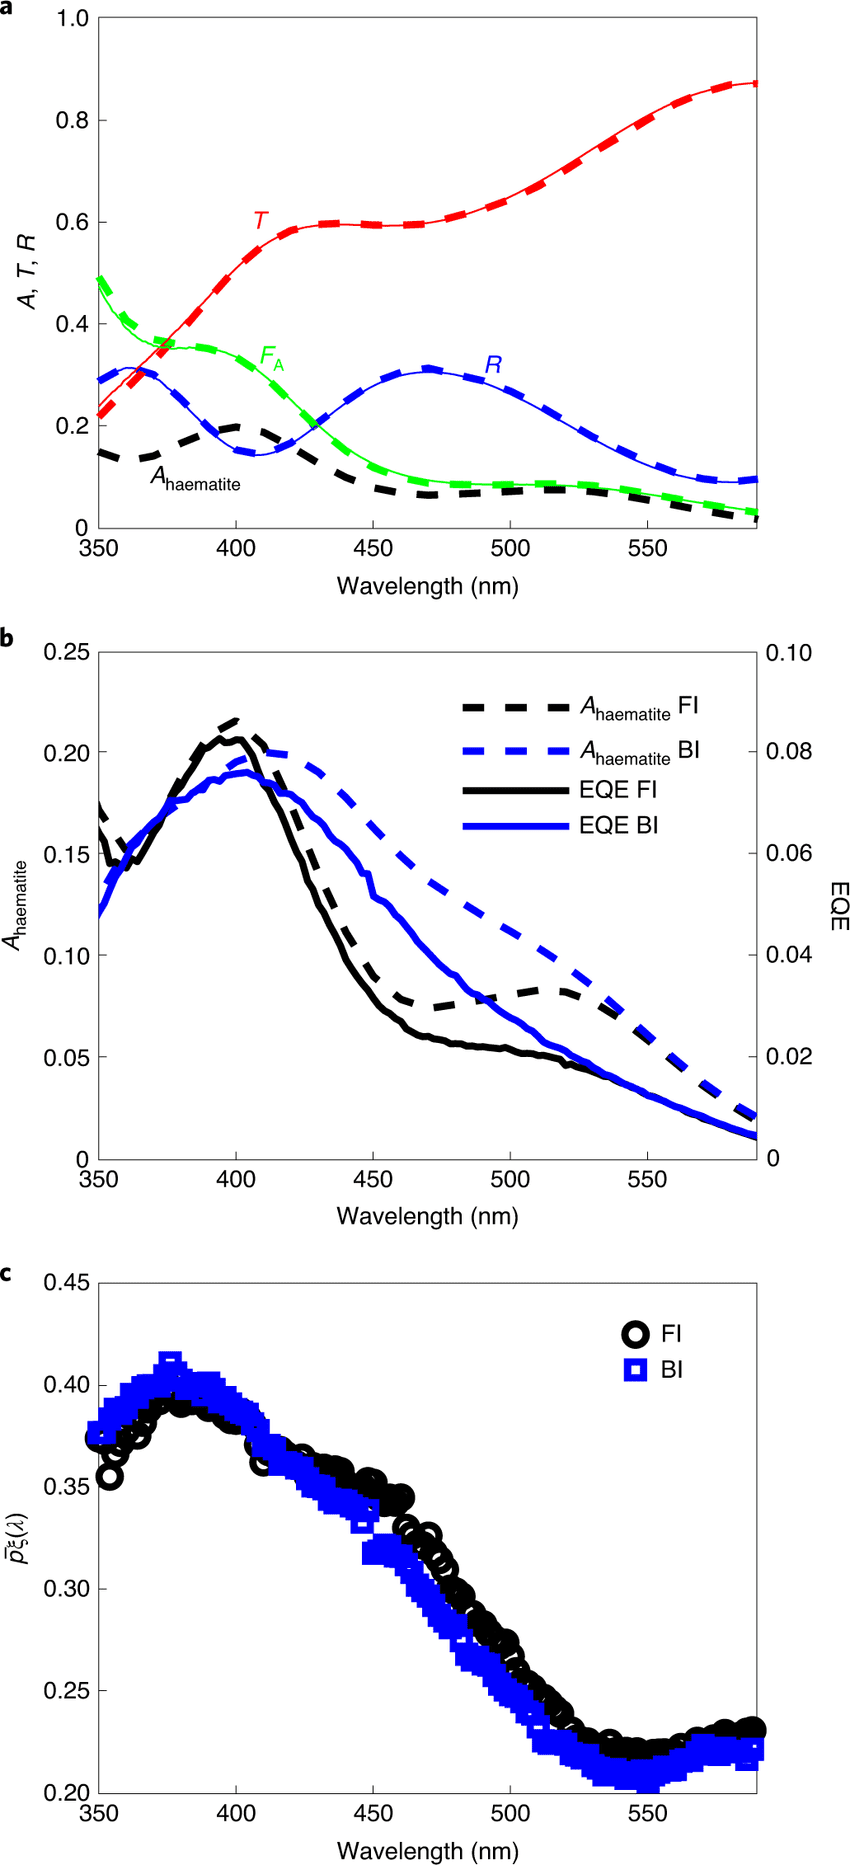 Extraction of the photogeneration yield spectrum from optical and photoelectrochemical EQE measurements of a 7-nm-thick haematite film
a, Measured (solid line) and calculated (dashed line) transmittance (T), reflectance (R) and absorptance (FA) spectra in front illumination in air. The calculated absorptance in the haematite layer only (Ahaematite) is also shown. b, The calculated haematite absorptance spectra in water and EQE spectra measured at 1.6 VRHE in front and back illumination (FI and BI, respectively). c, The extracted p¯ξλ\documentclass[12pt]{minimal} \usepackage{amsmath} \usepackage{wasysym} \usepackage{amsfonts} \usepackage{amssymb} \usepackage{amsbsy} \usepackage{mathrsfs} \usepackage{upgreek} \setlength{\oddsidemargin}{-69pt} \begin{document}$$\bar p \xi \left( {\it{\lambda }} \right)$$\end{document} spectra for front (black) and back (blue) illumination.